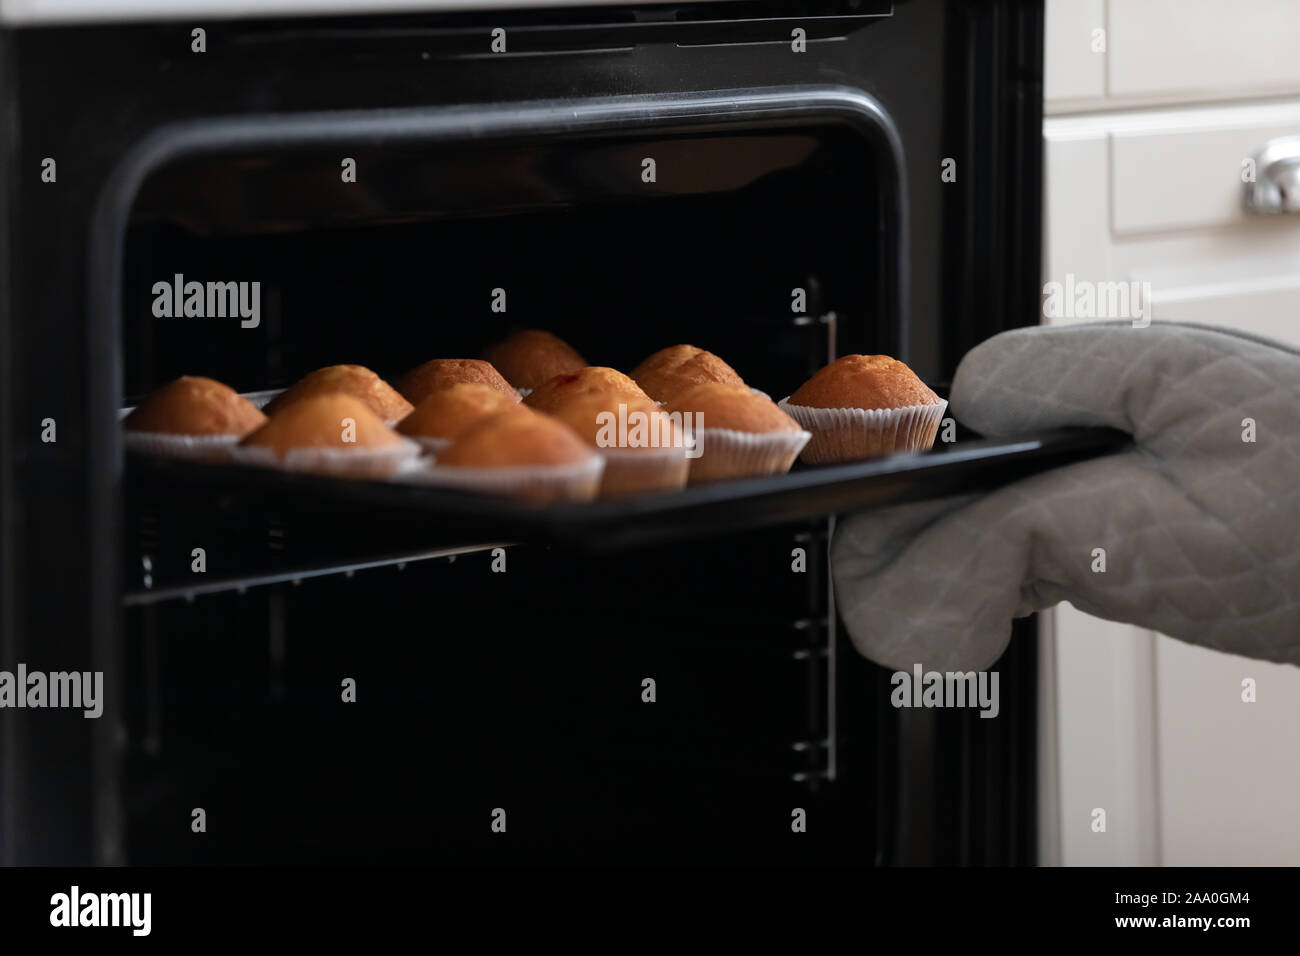 Housewife or professional confectioner taking appetizing muffins out of oven. Stock Photo